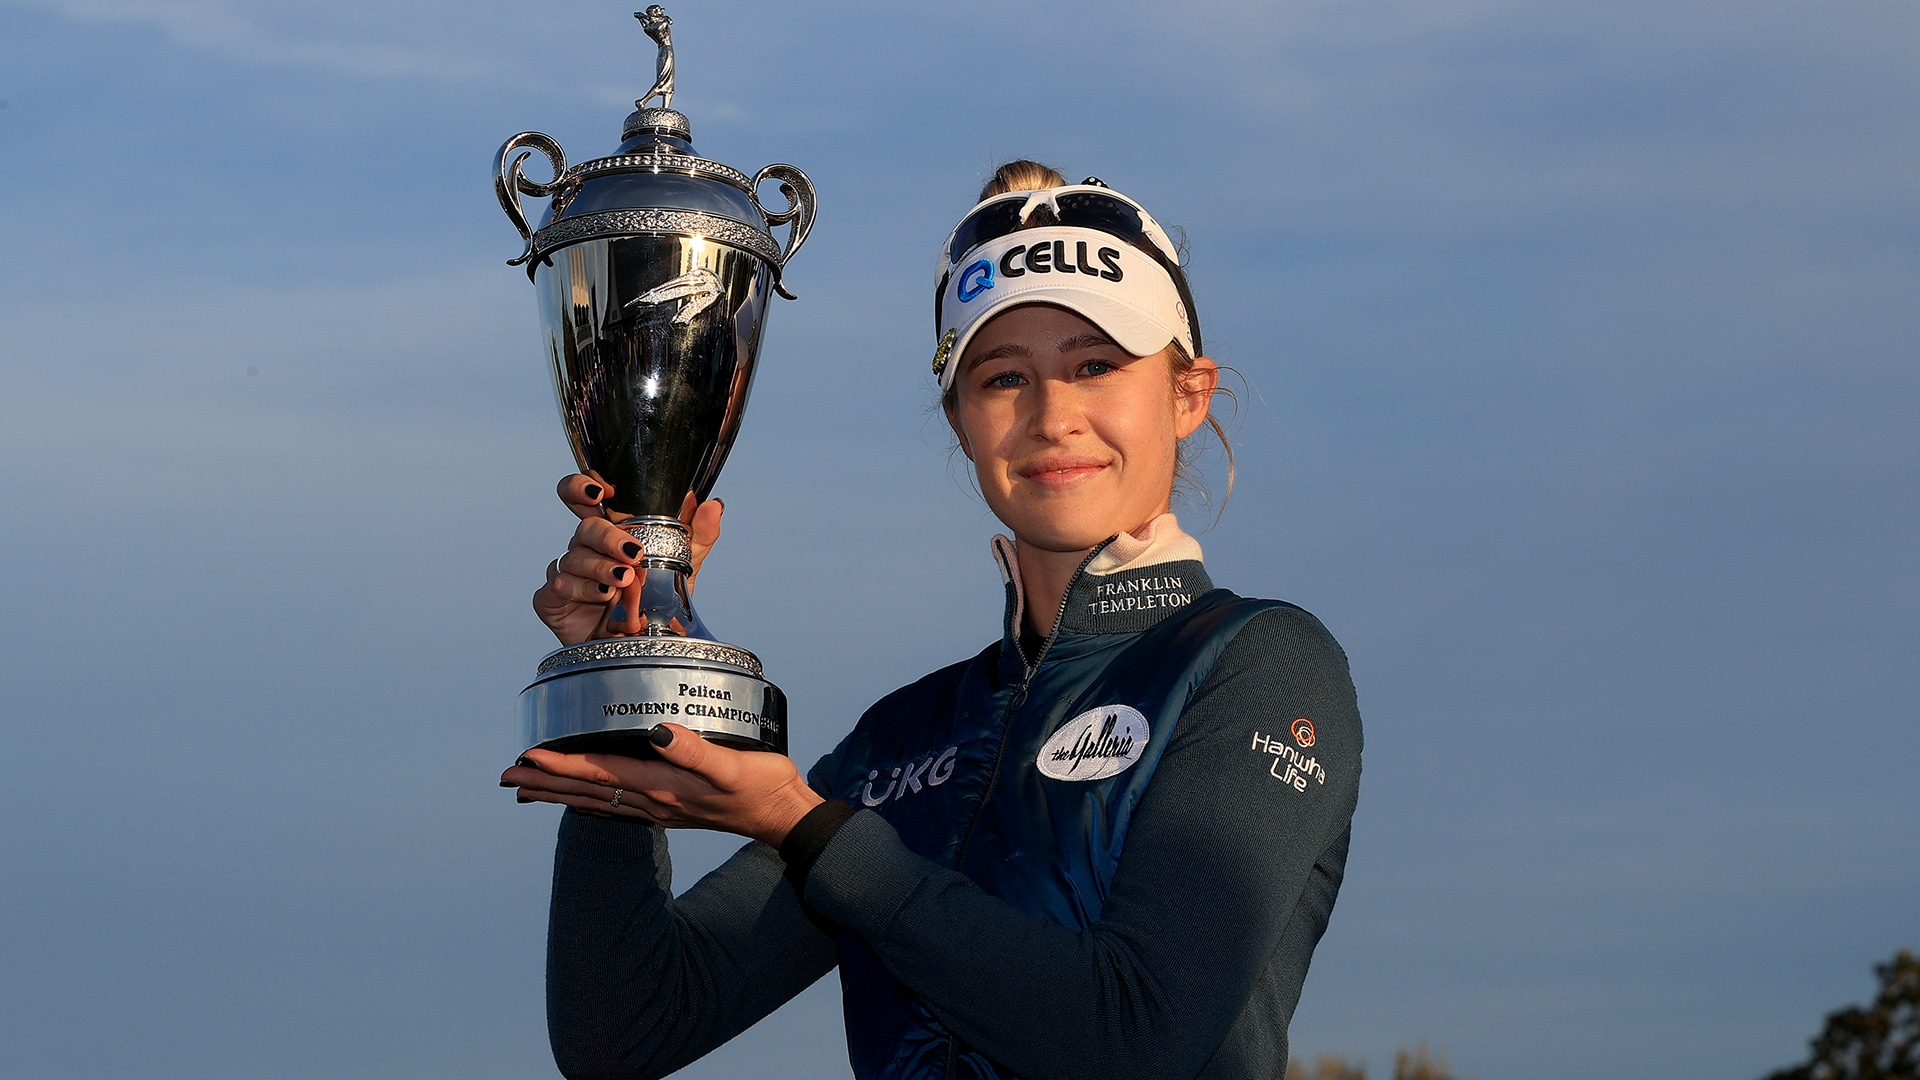 Nelly Korda makes clutch putts on 18 to win Pelican title, Lexi Thompson doesn't 2